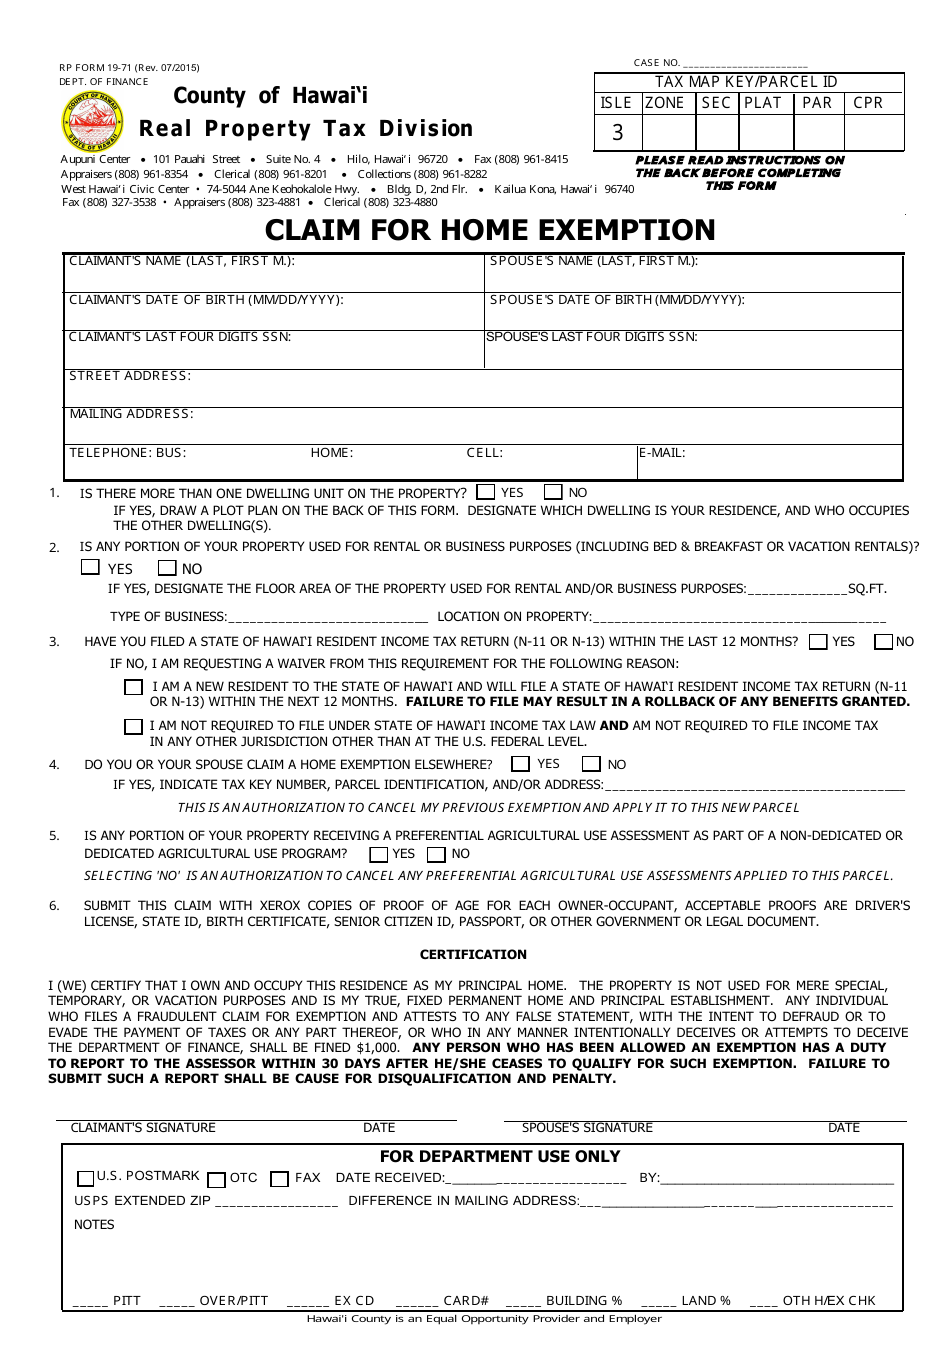 Form RP19-71 Claim for Home Exemption - County of Hawai'i, Hawaii, Page 1